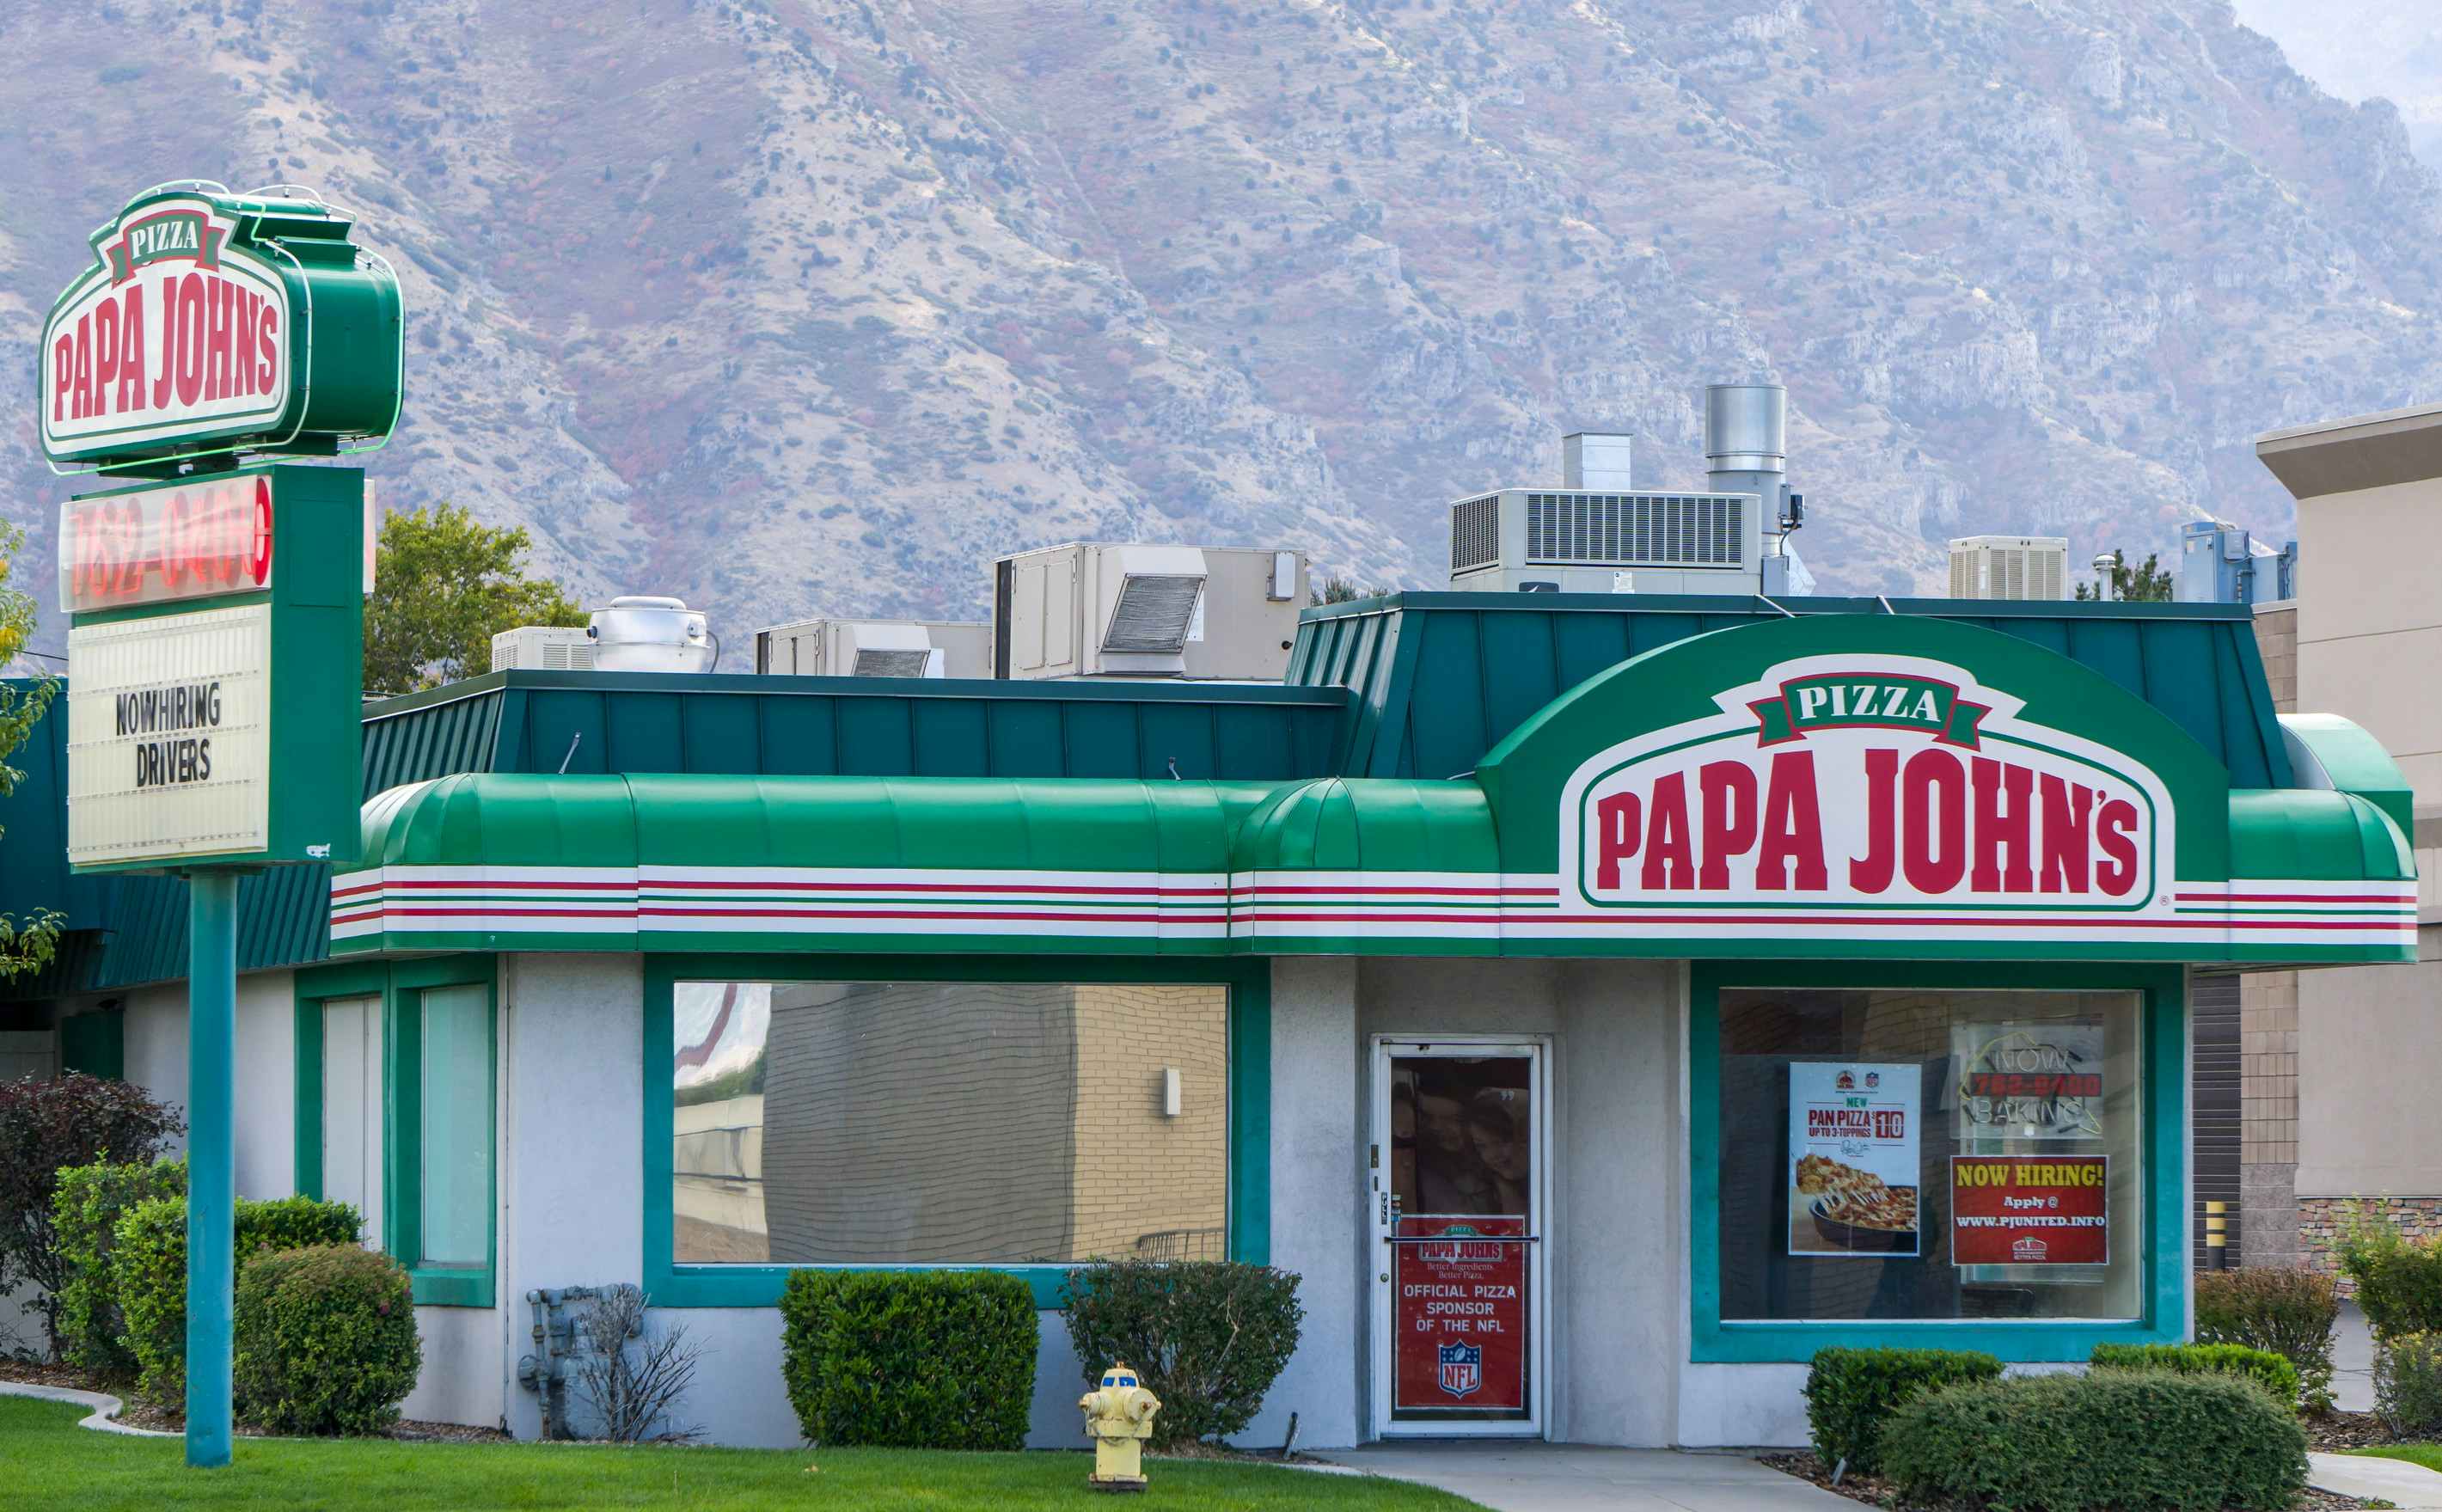 Picture of Papa John's restaurant with mountains in the background